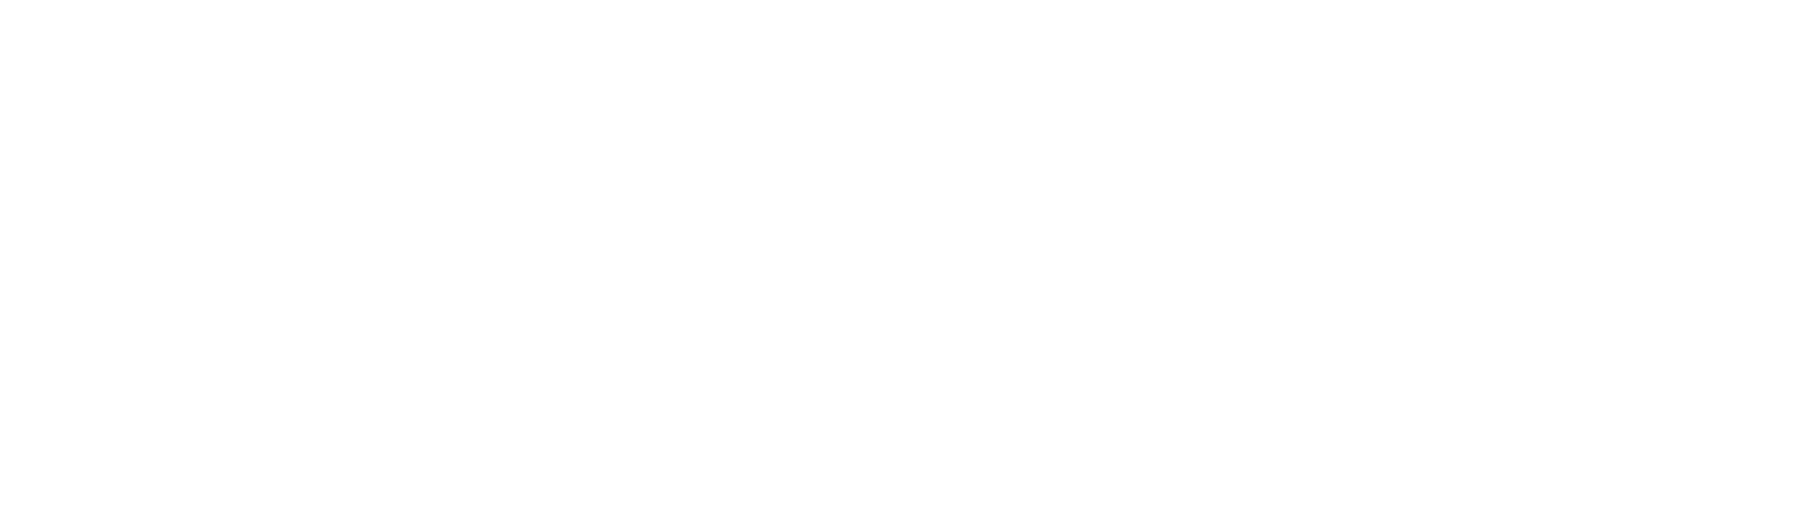 Optum.png